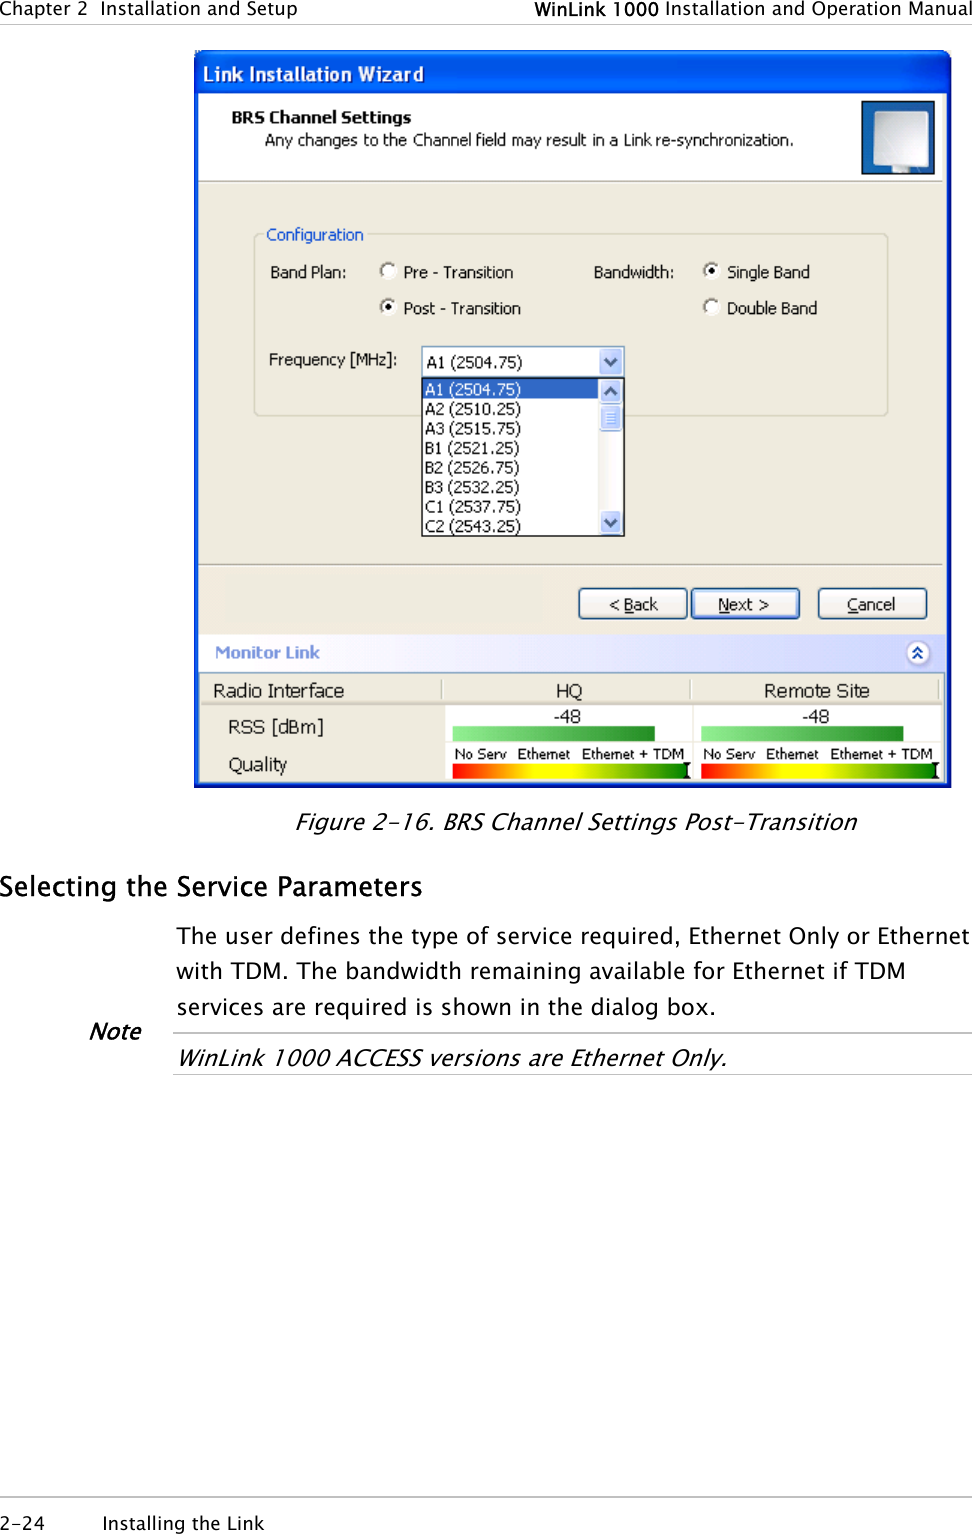 Chapter  2  Installation and Setup  WinLink 1000 Installation and Operation Manual  Figure  2-16. BRS Channel Settings Post-Transition Selecting the Service Parameters The user defines the type of service required, Ethernet Only or Ethernet with TDM. The bandwidth remaining available for Ethernet if TDM services are required is shown in the dialog box.   WinLink 1000 ACCESS versions are Ethernet Only.   Note 2-24 Installing the Link   